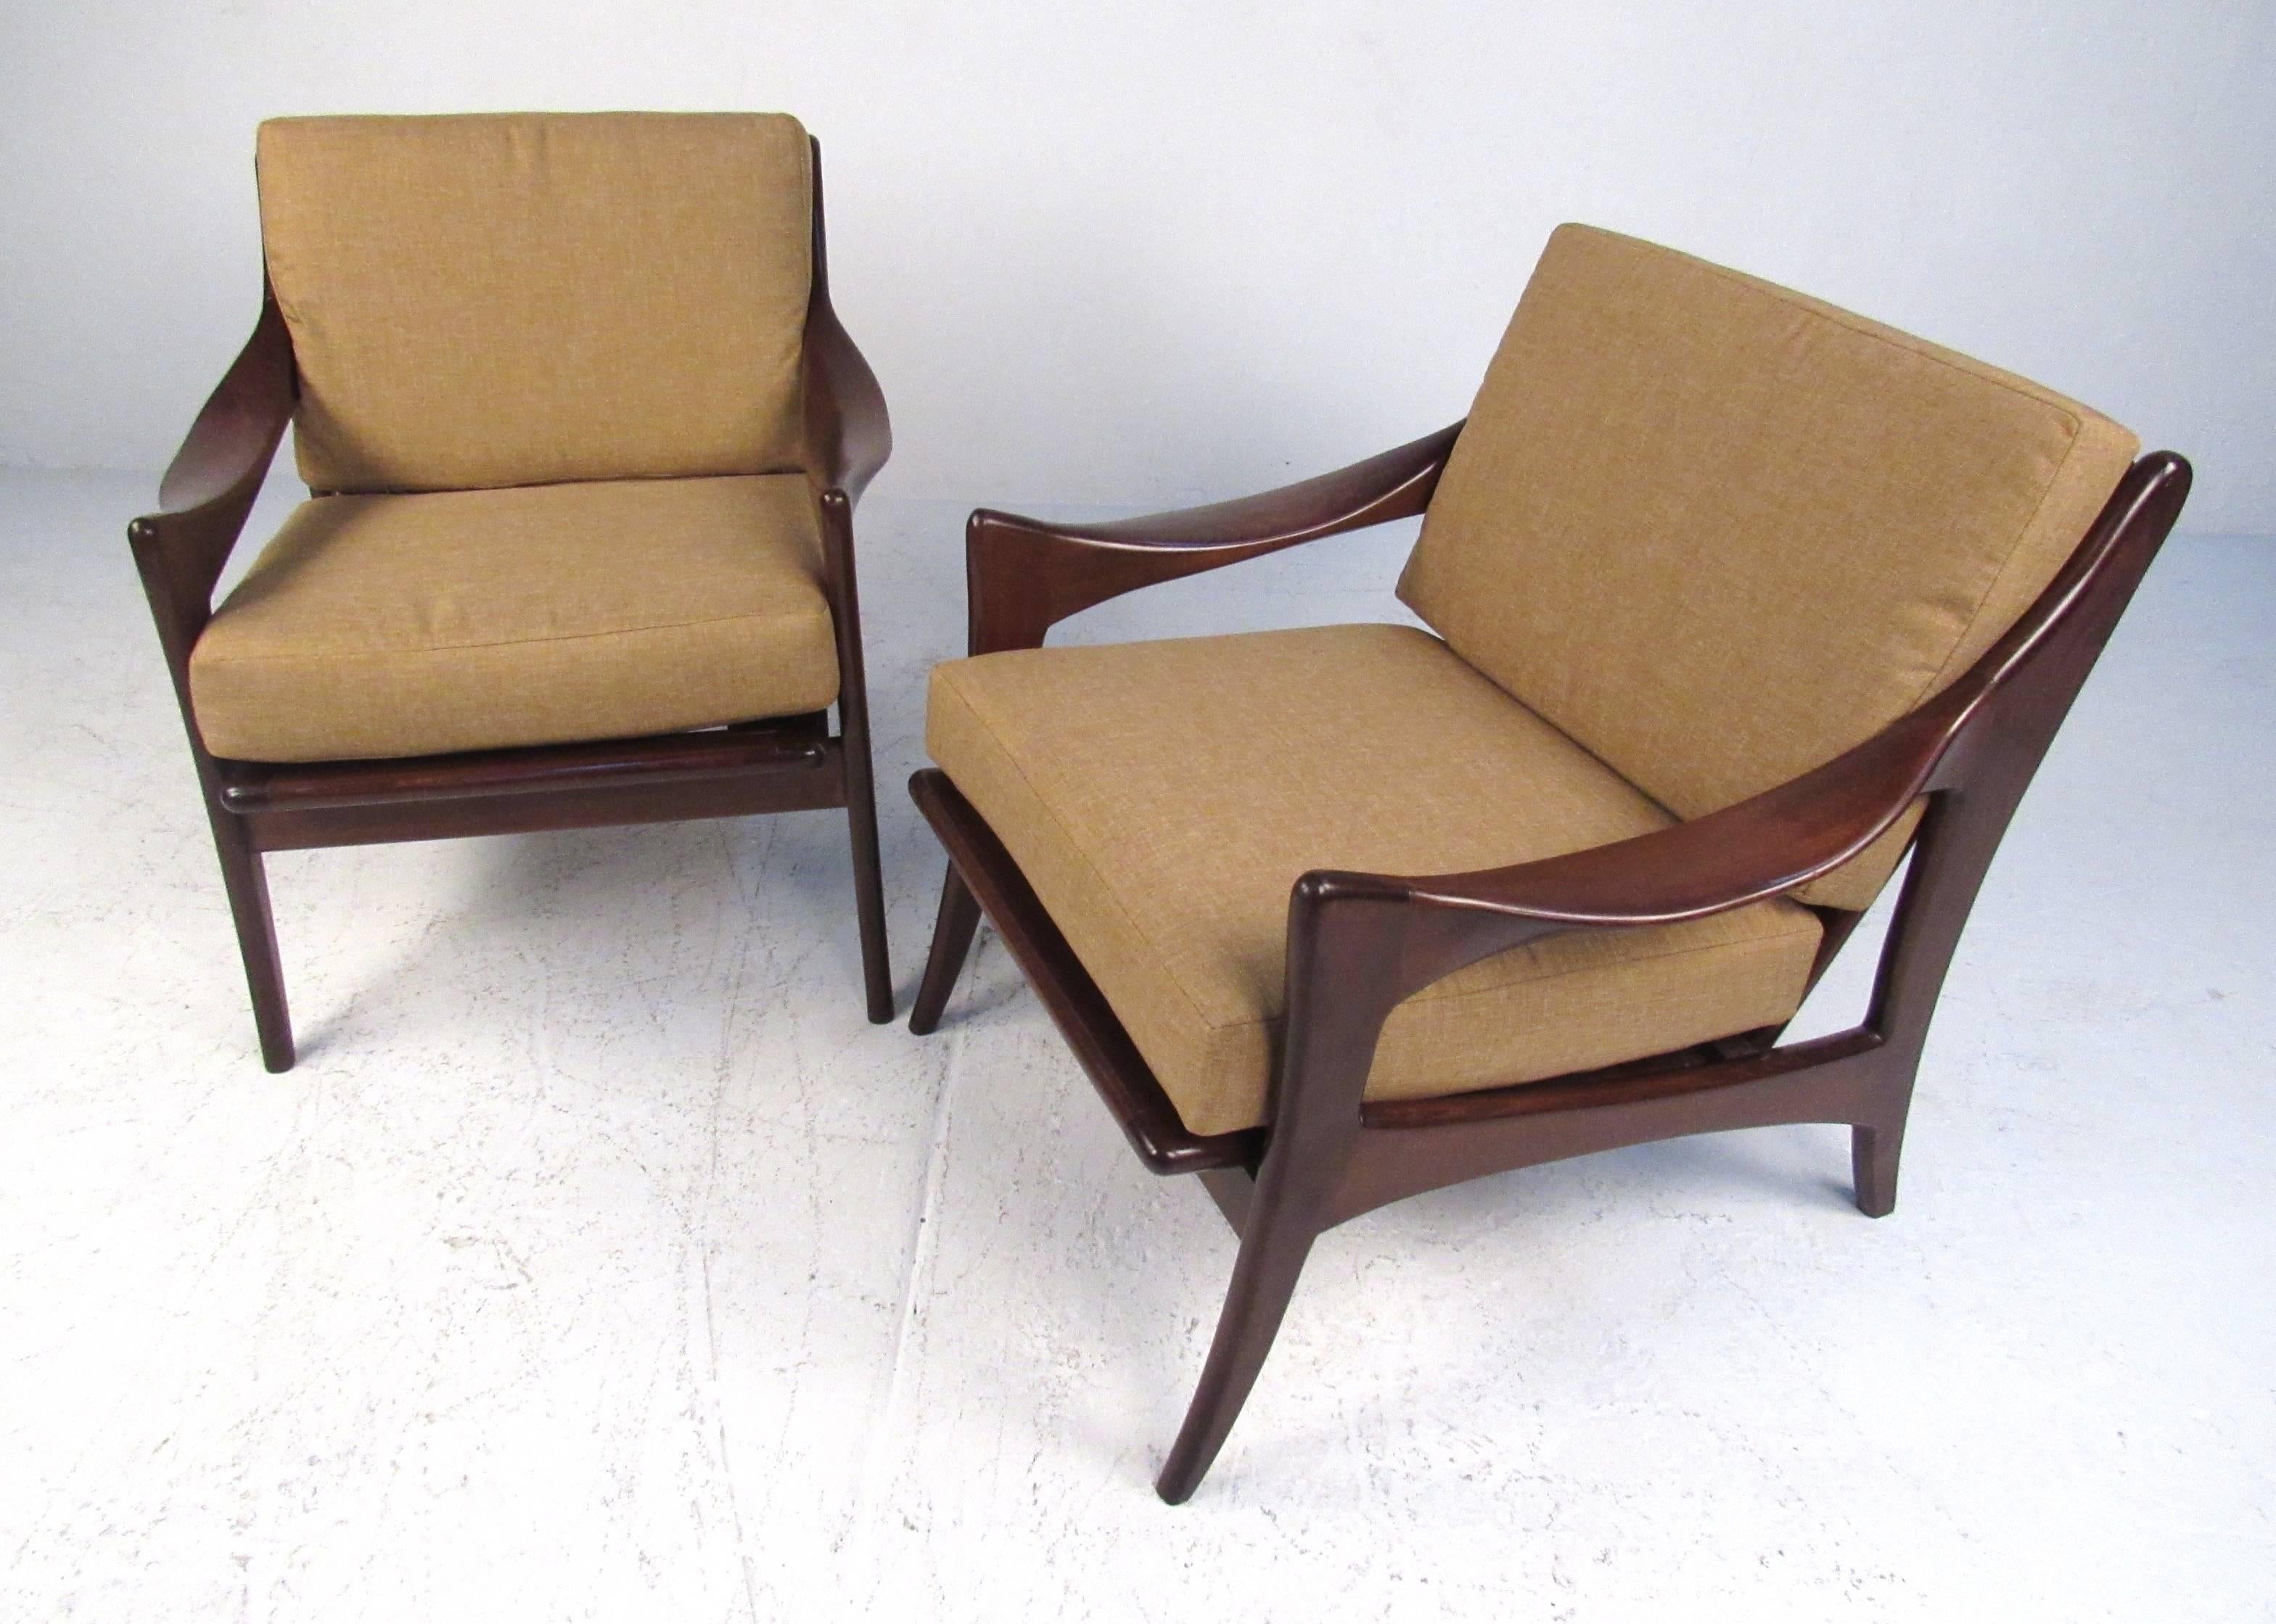 American Pair Mid-Century Lounge Chairs With Slat Backs